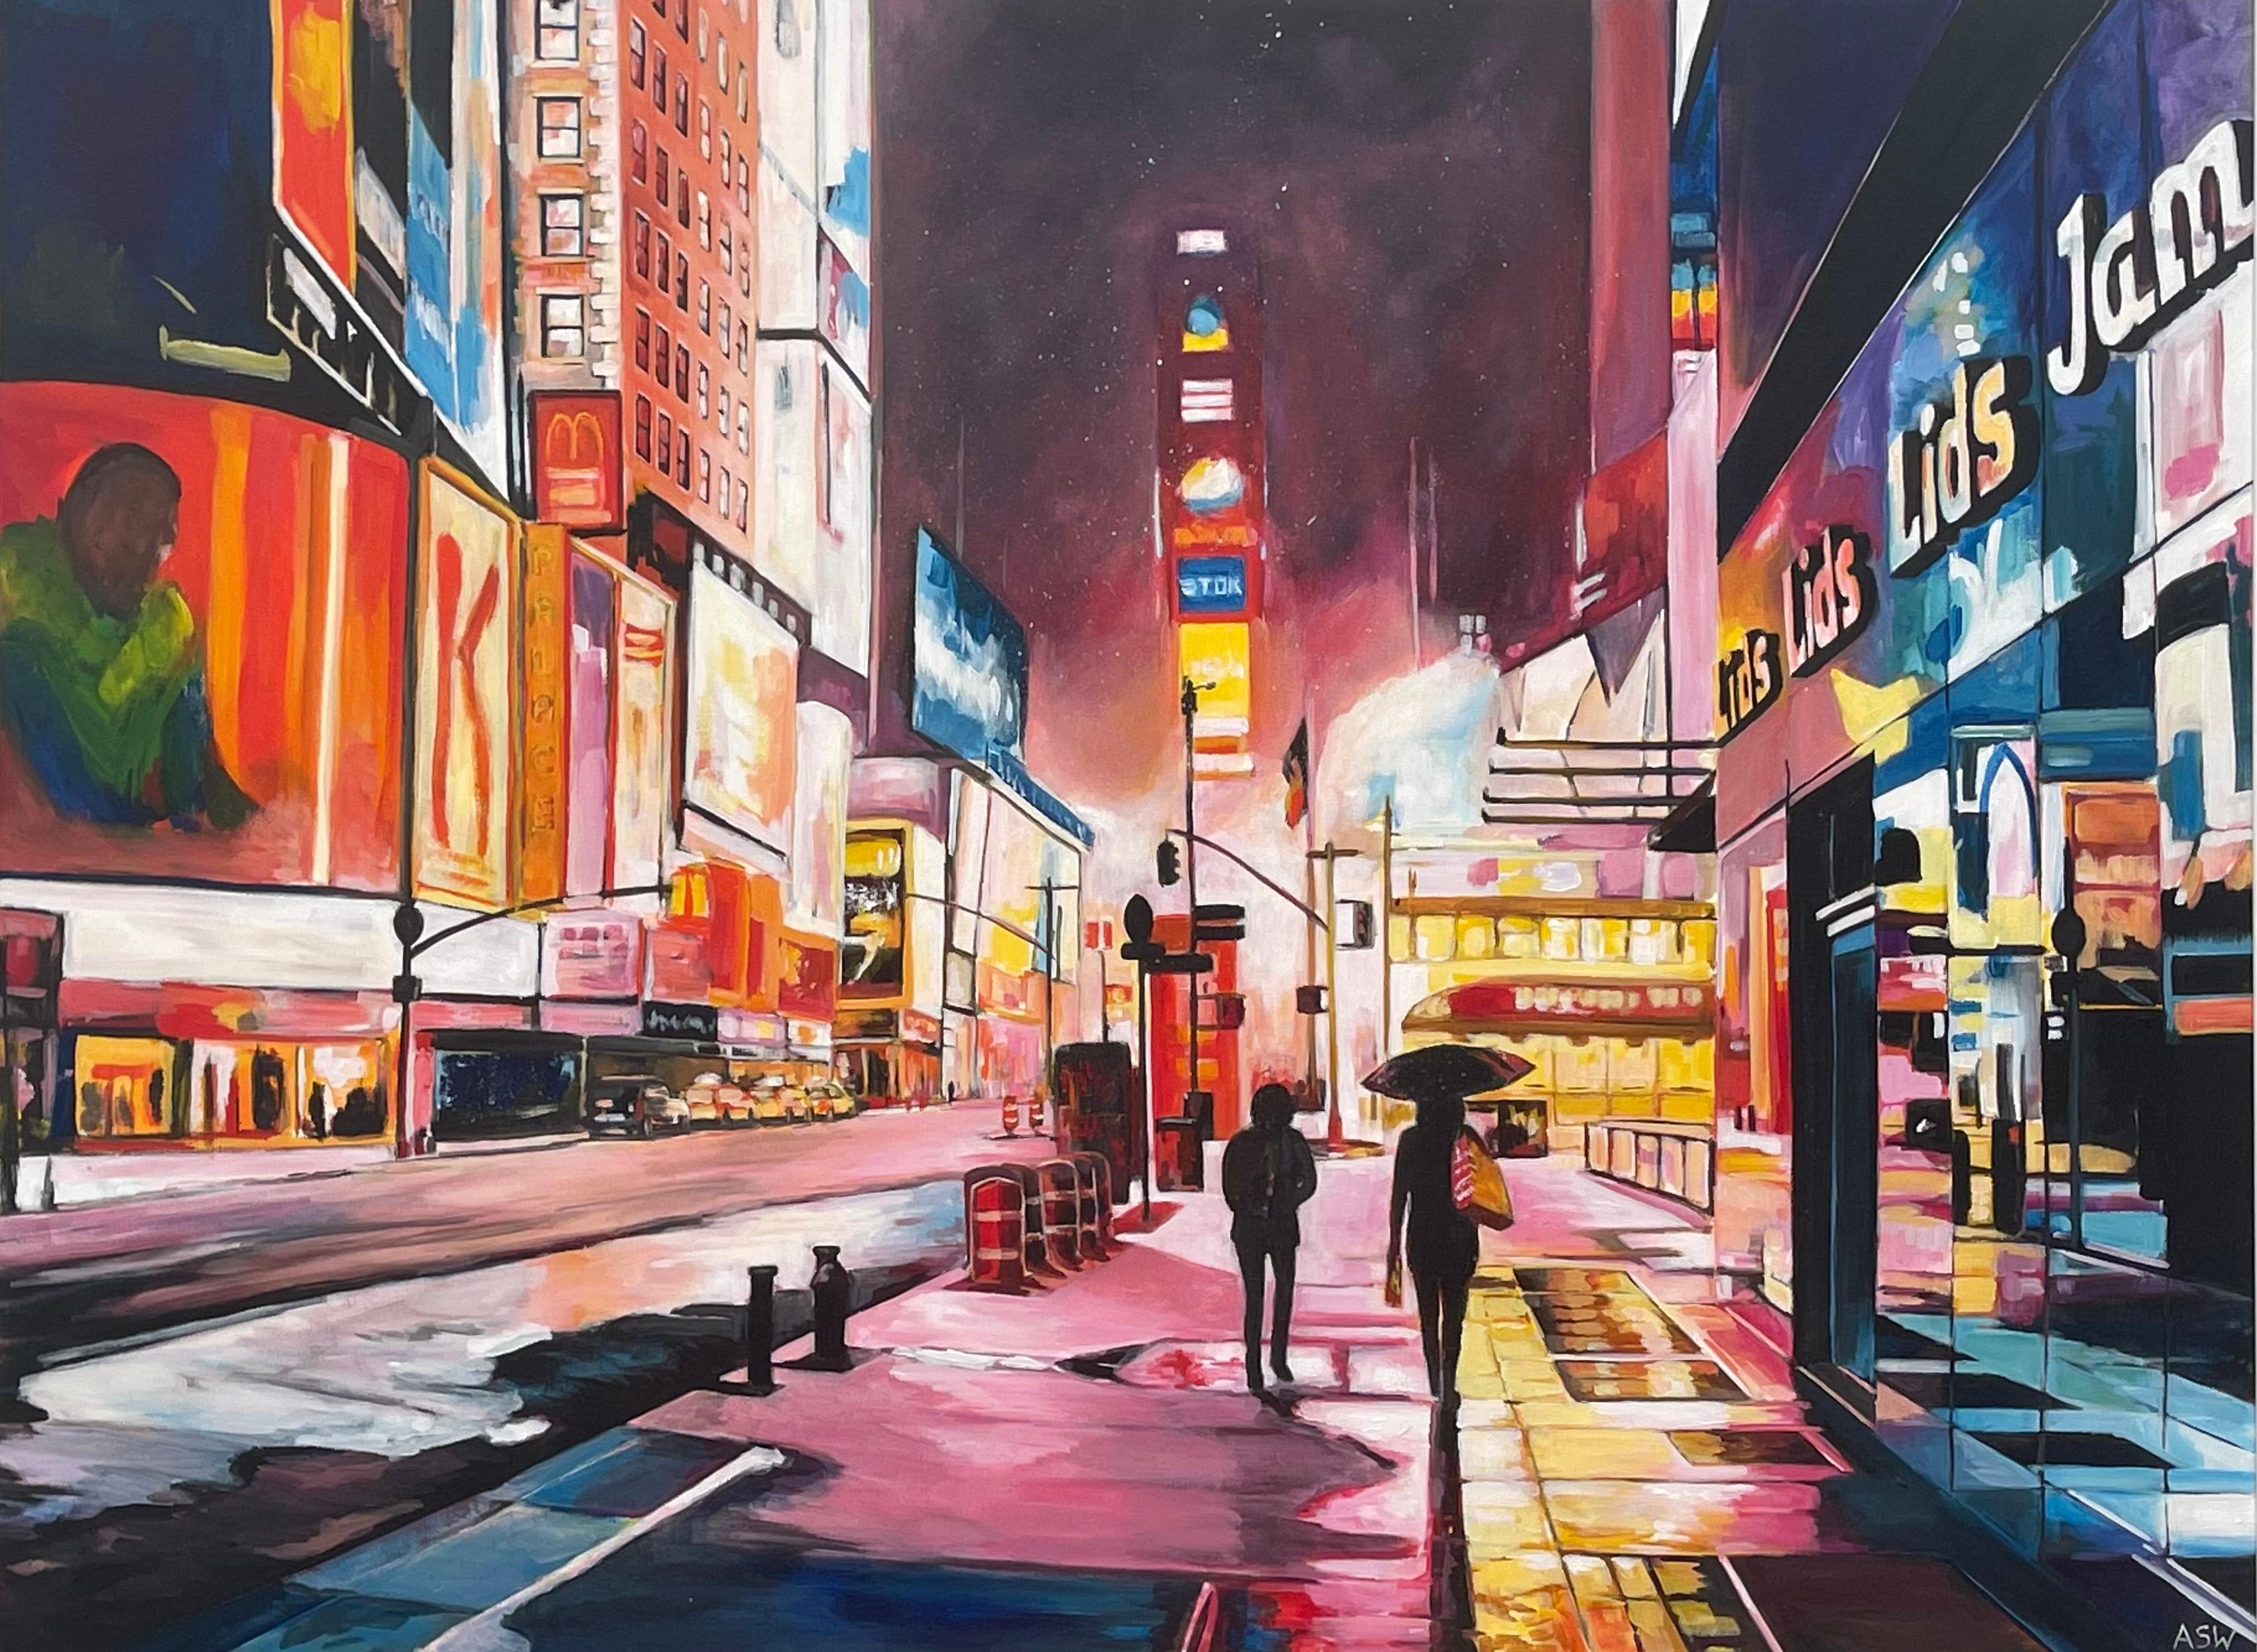 Painting of Times Square Manhattan New York City by Contemporary British Artist Angela Wakefield. 

Art measures 48 x 36 inches 
Frame measures 53 x 41 inches 

Wakefield's work is a unique blend of abstraction and realism, with a strong emphasis on